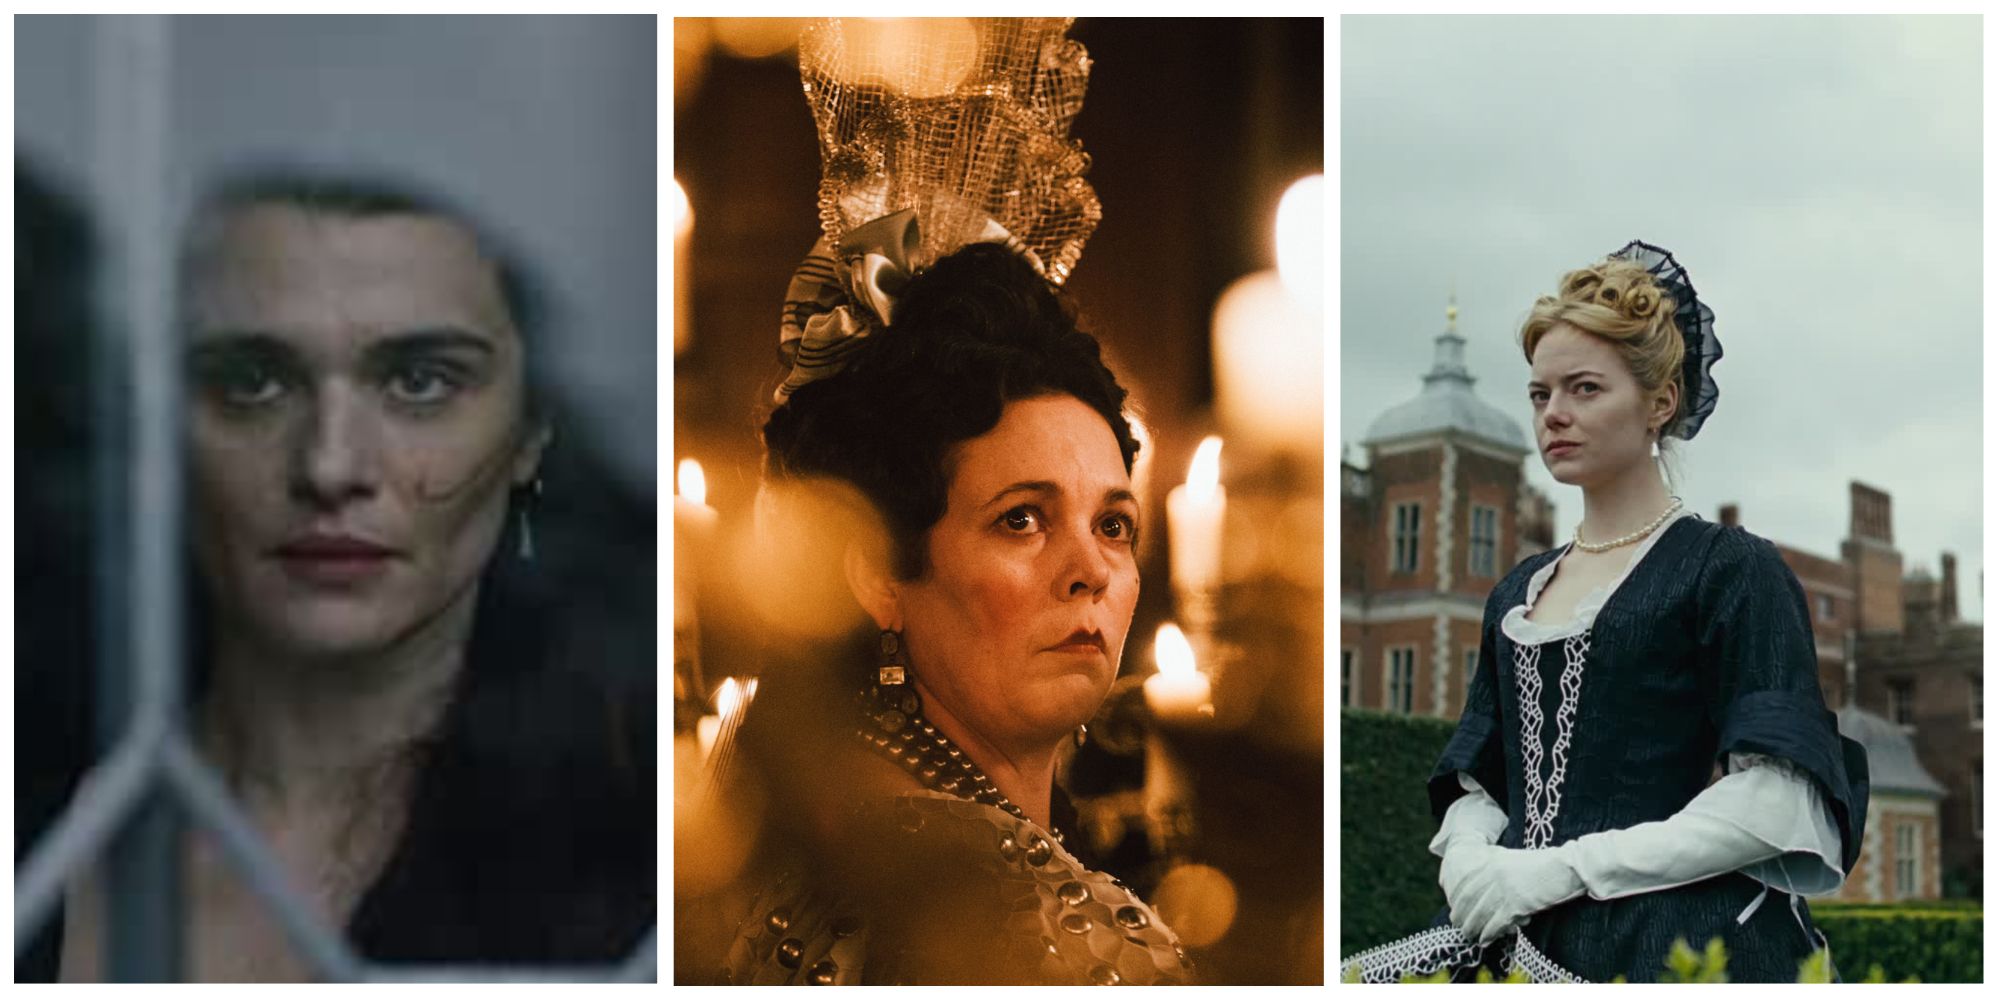 From left to right: Images of Rachel Weisz, Olivia Colman and Emma Stone in their respective roles in The Favourite.